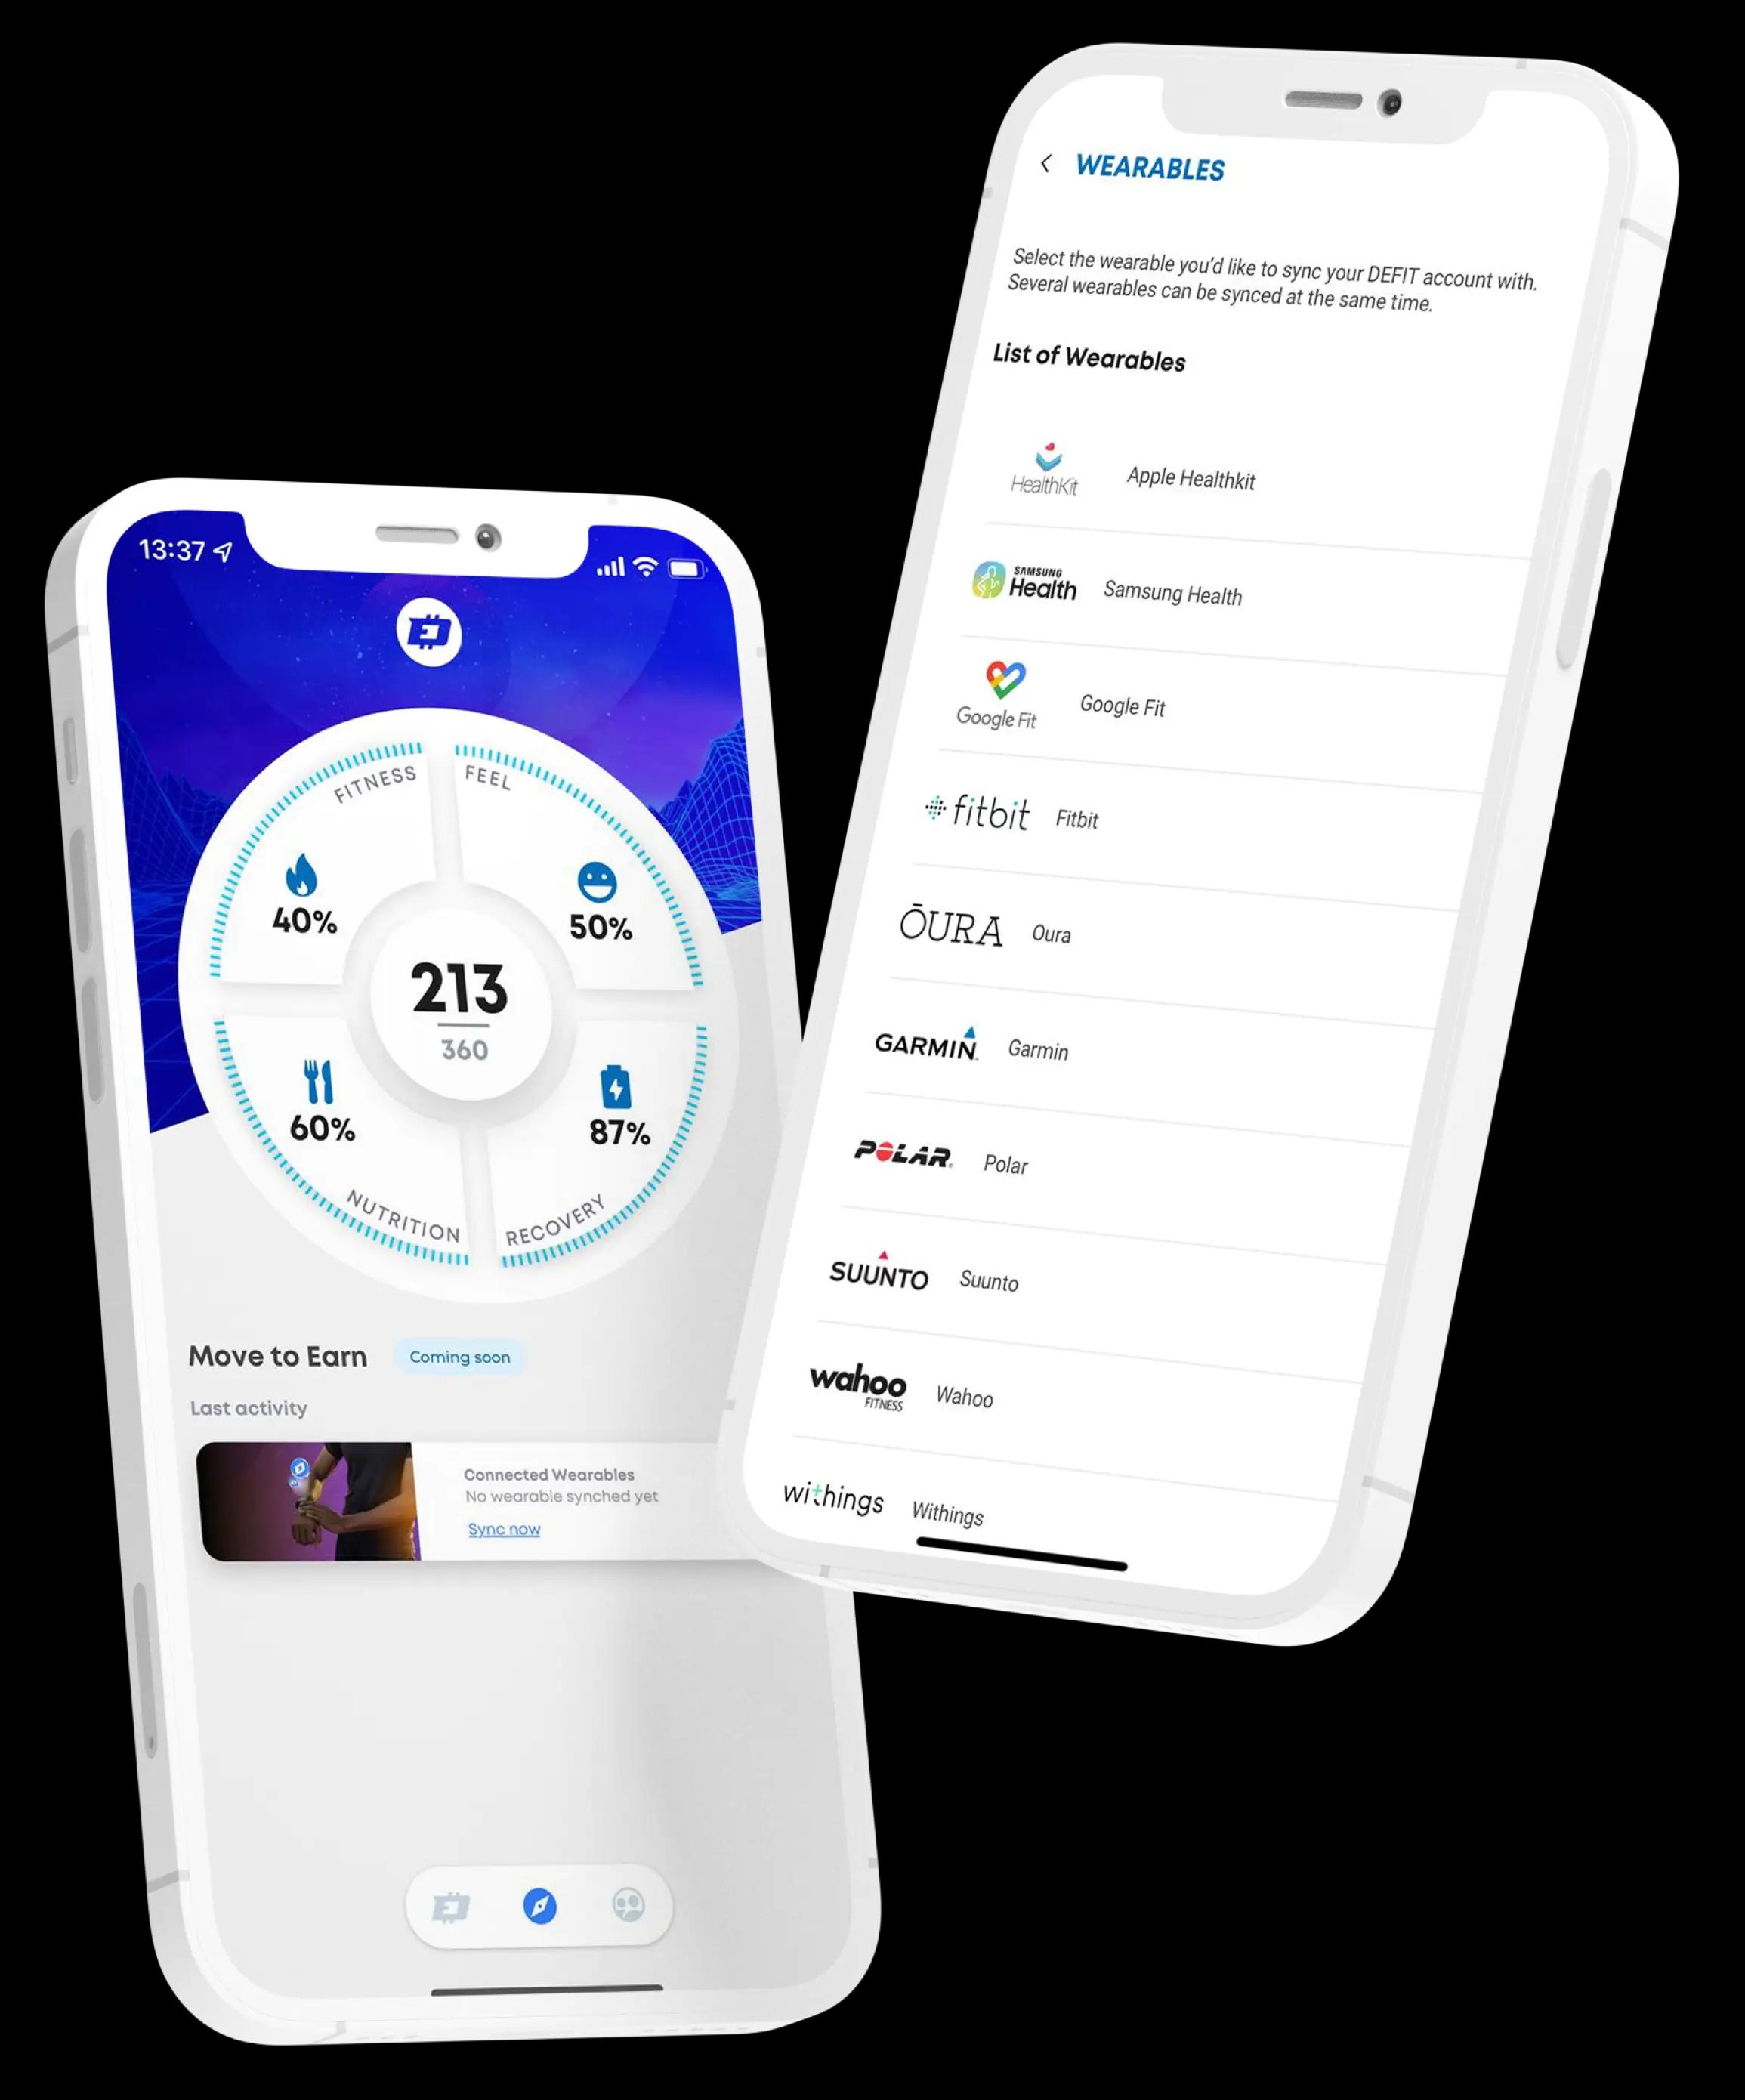 DEFIT is a web3 lifestyle app leading the Move-to-Earn revolution. Get rewarded in DEFIT cryptocurrency for your fitness activities.